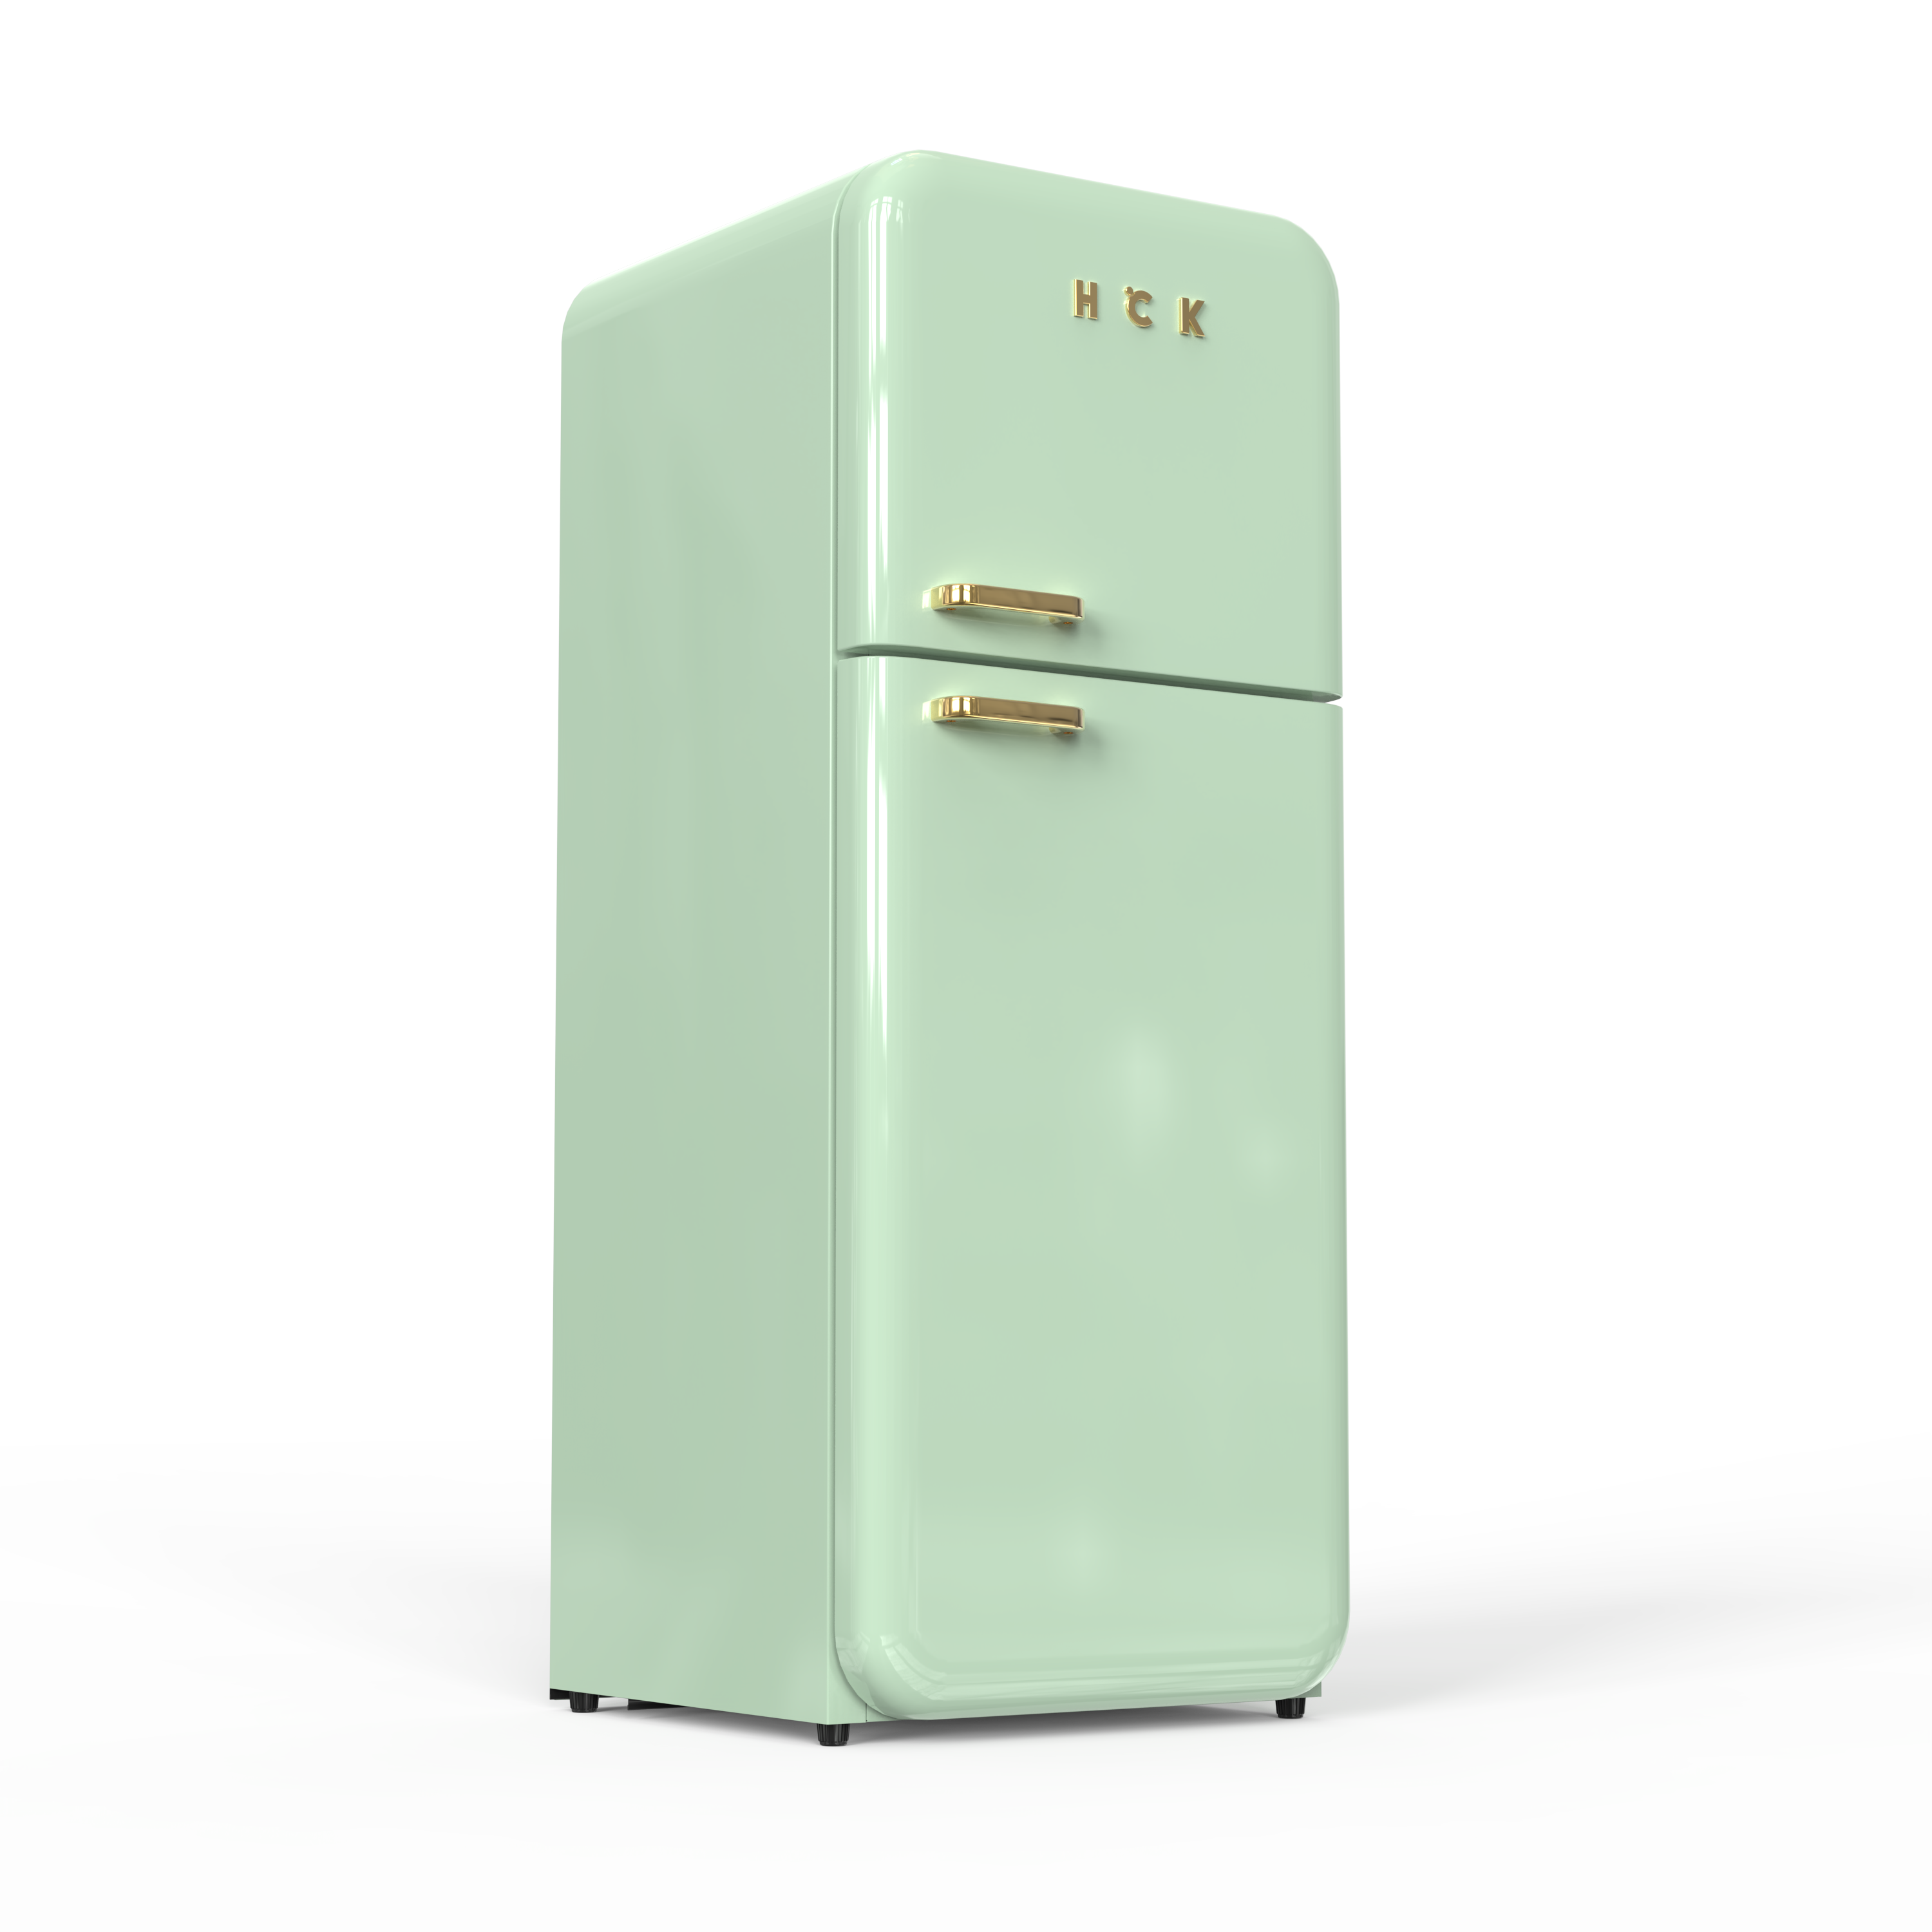 HCK Retro Refrigerator 192L,Suitable for Home Office College BCD-192RS